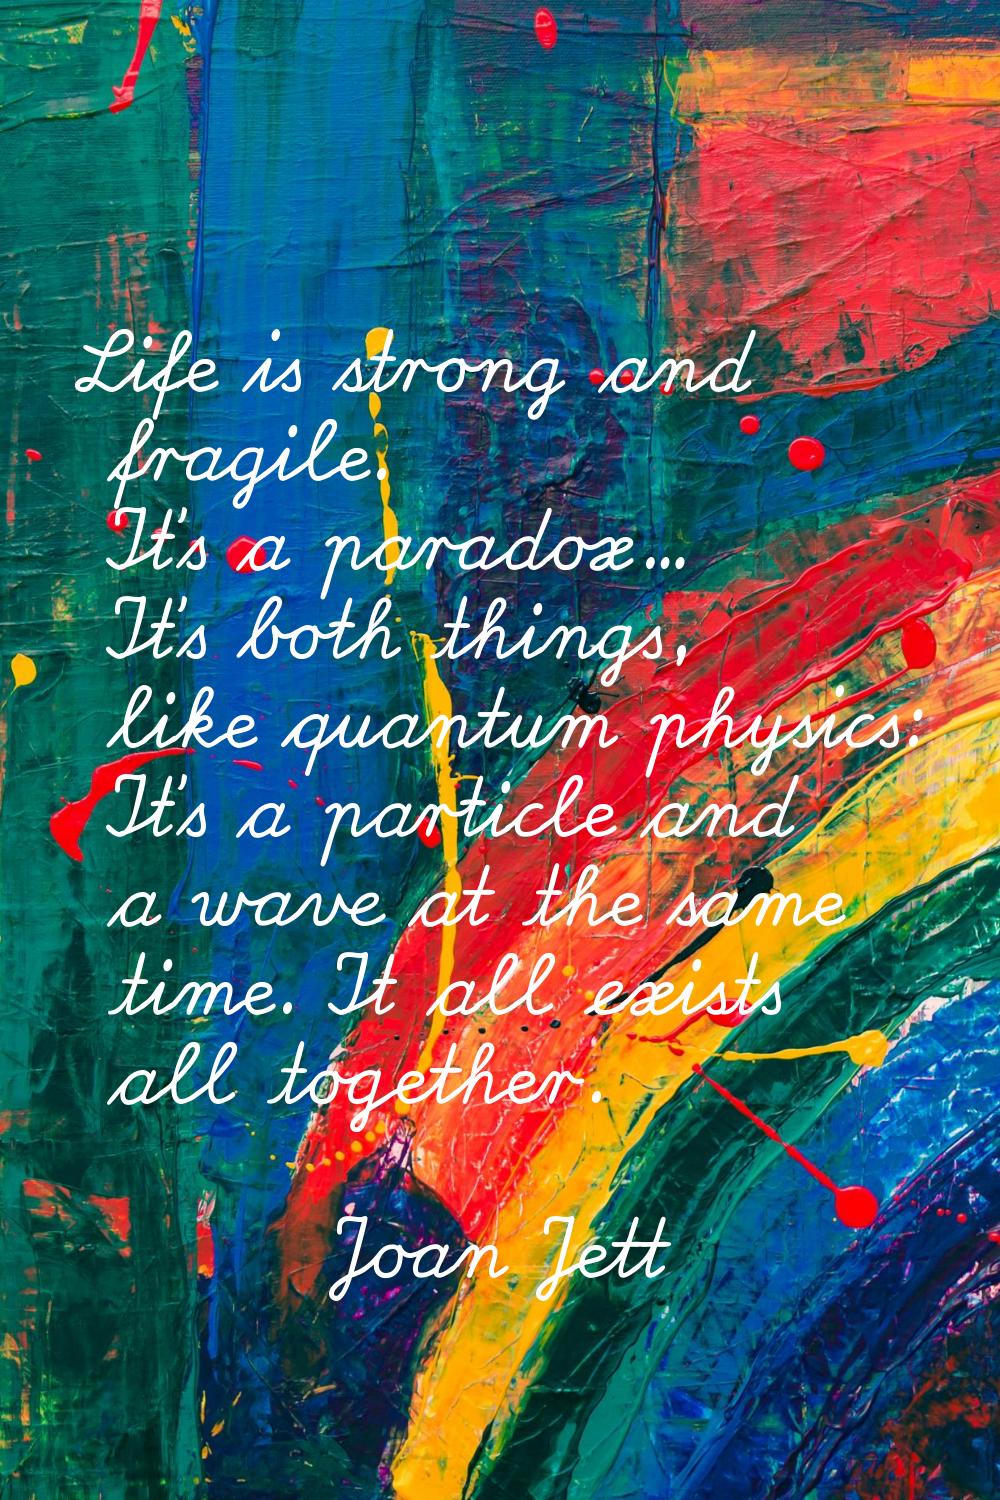 Life is strong and fragile. It's a paradox... It's both things, like quantum physics: It's a partic